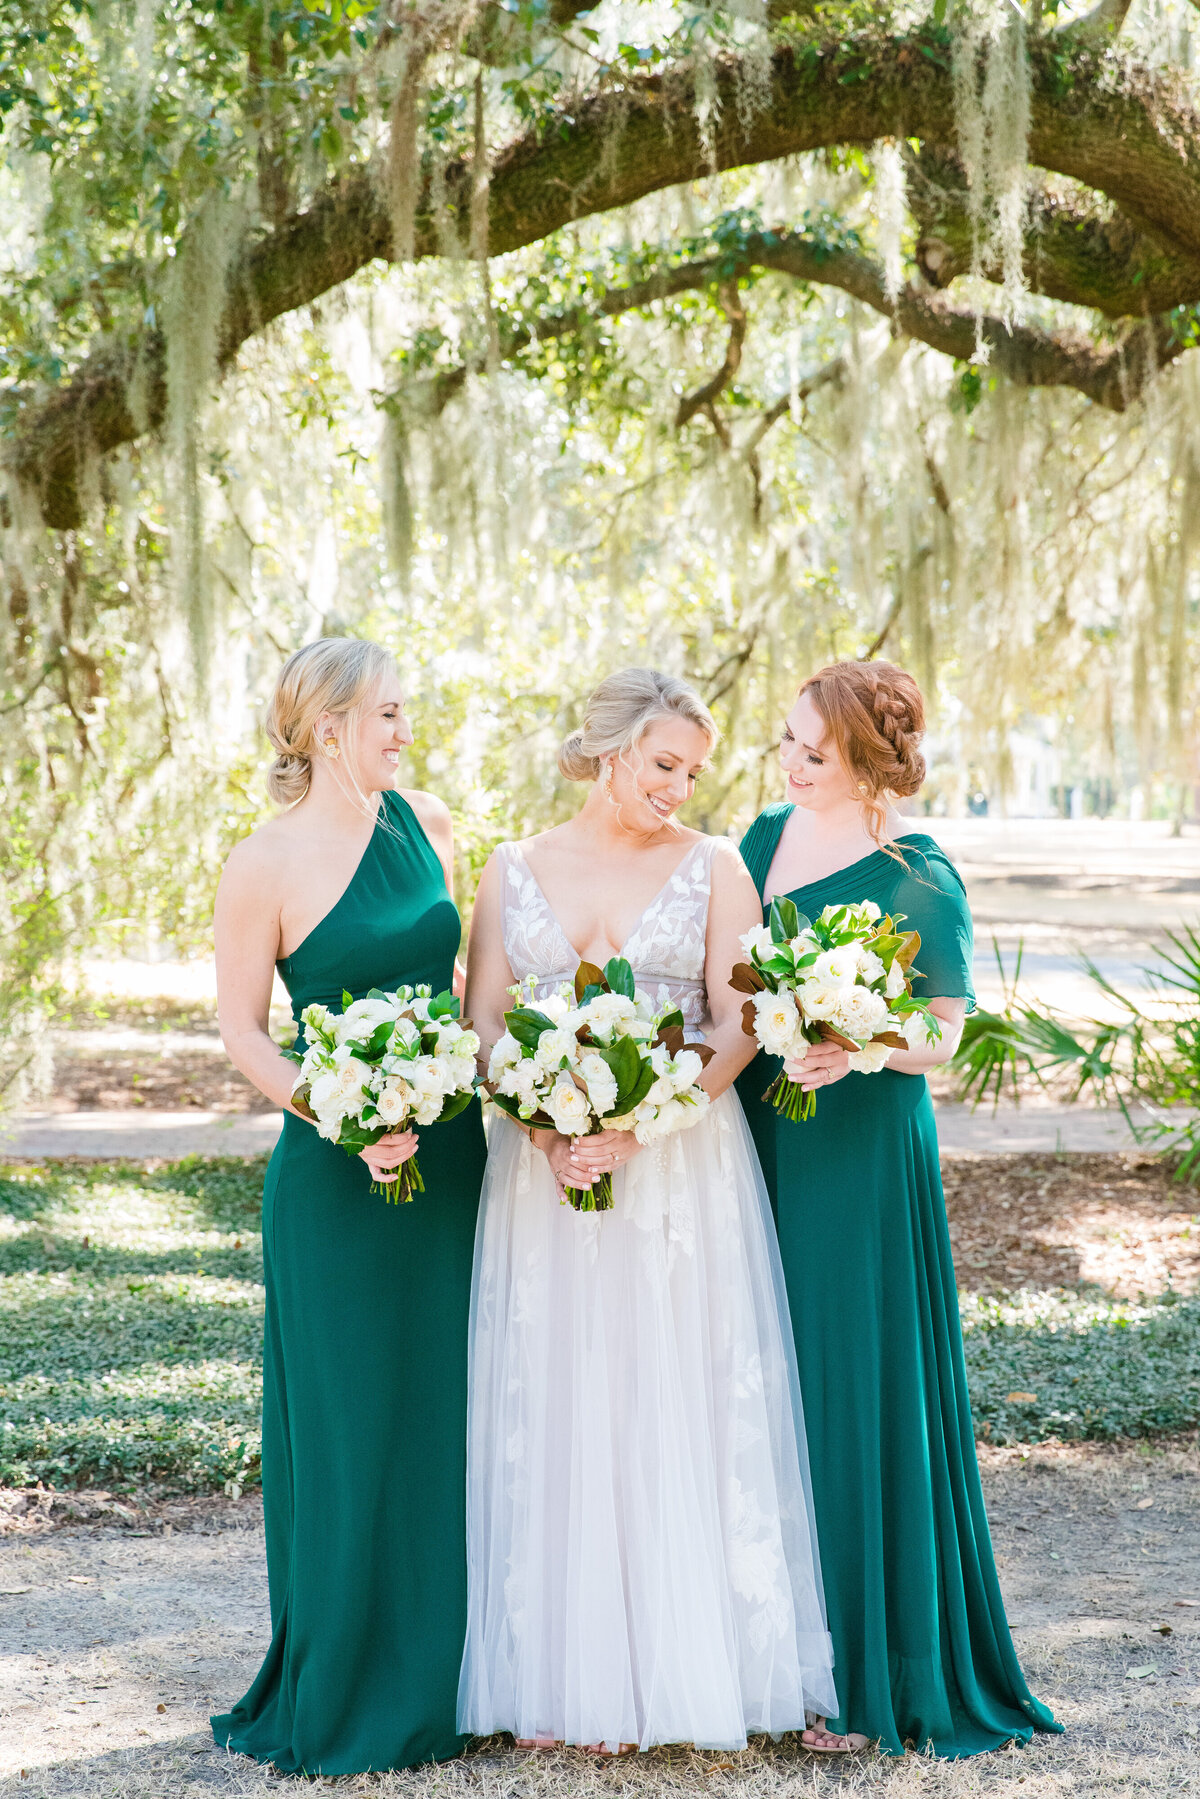 Bride with bridesmaids before her Veuve-inspired wedding at Palmetto Bluff in Charleston, SC. Photographed by Charleston Wedding Photographer Dana Cubbage.